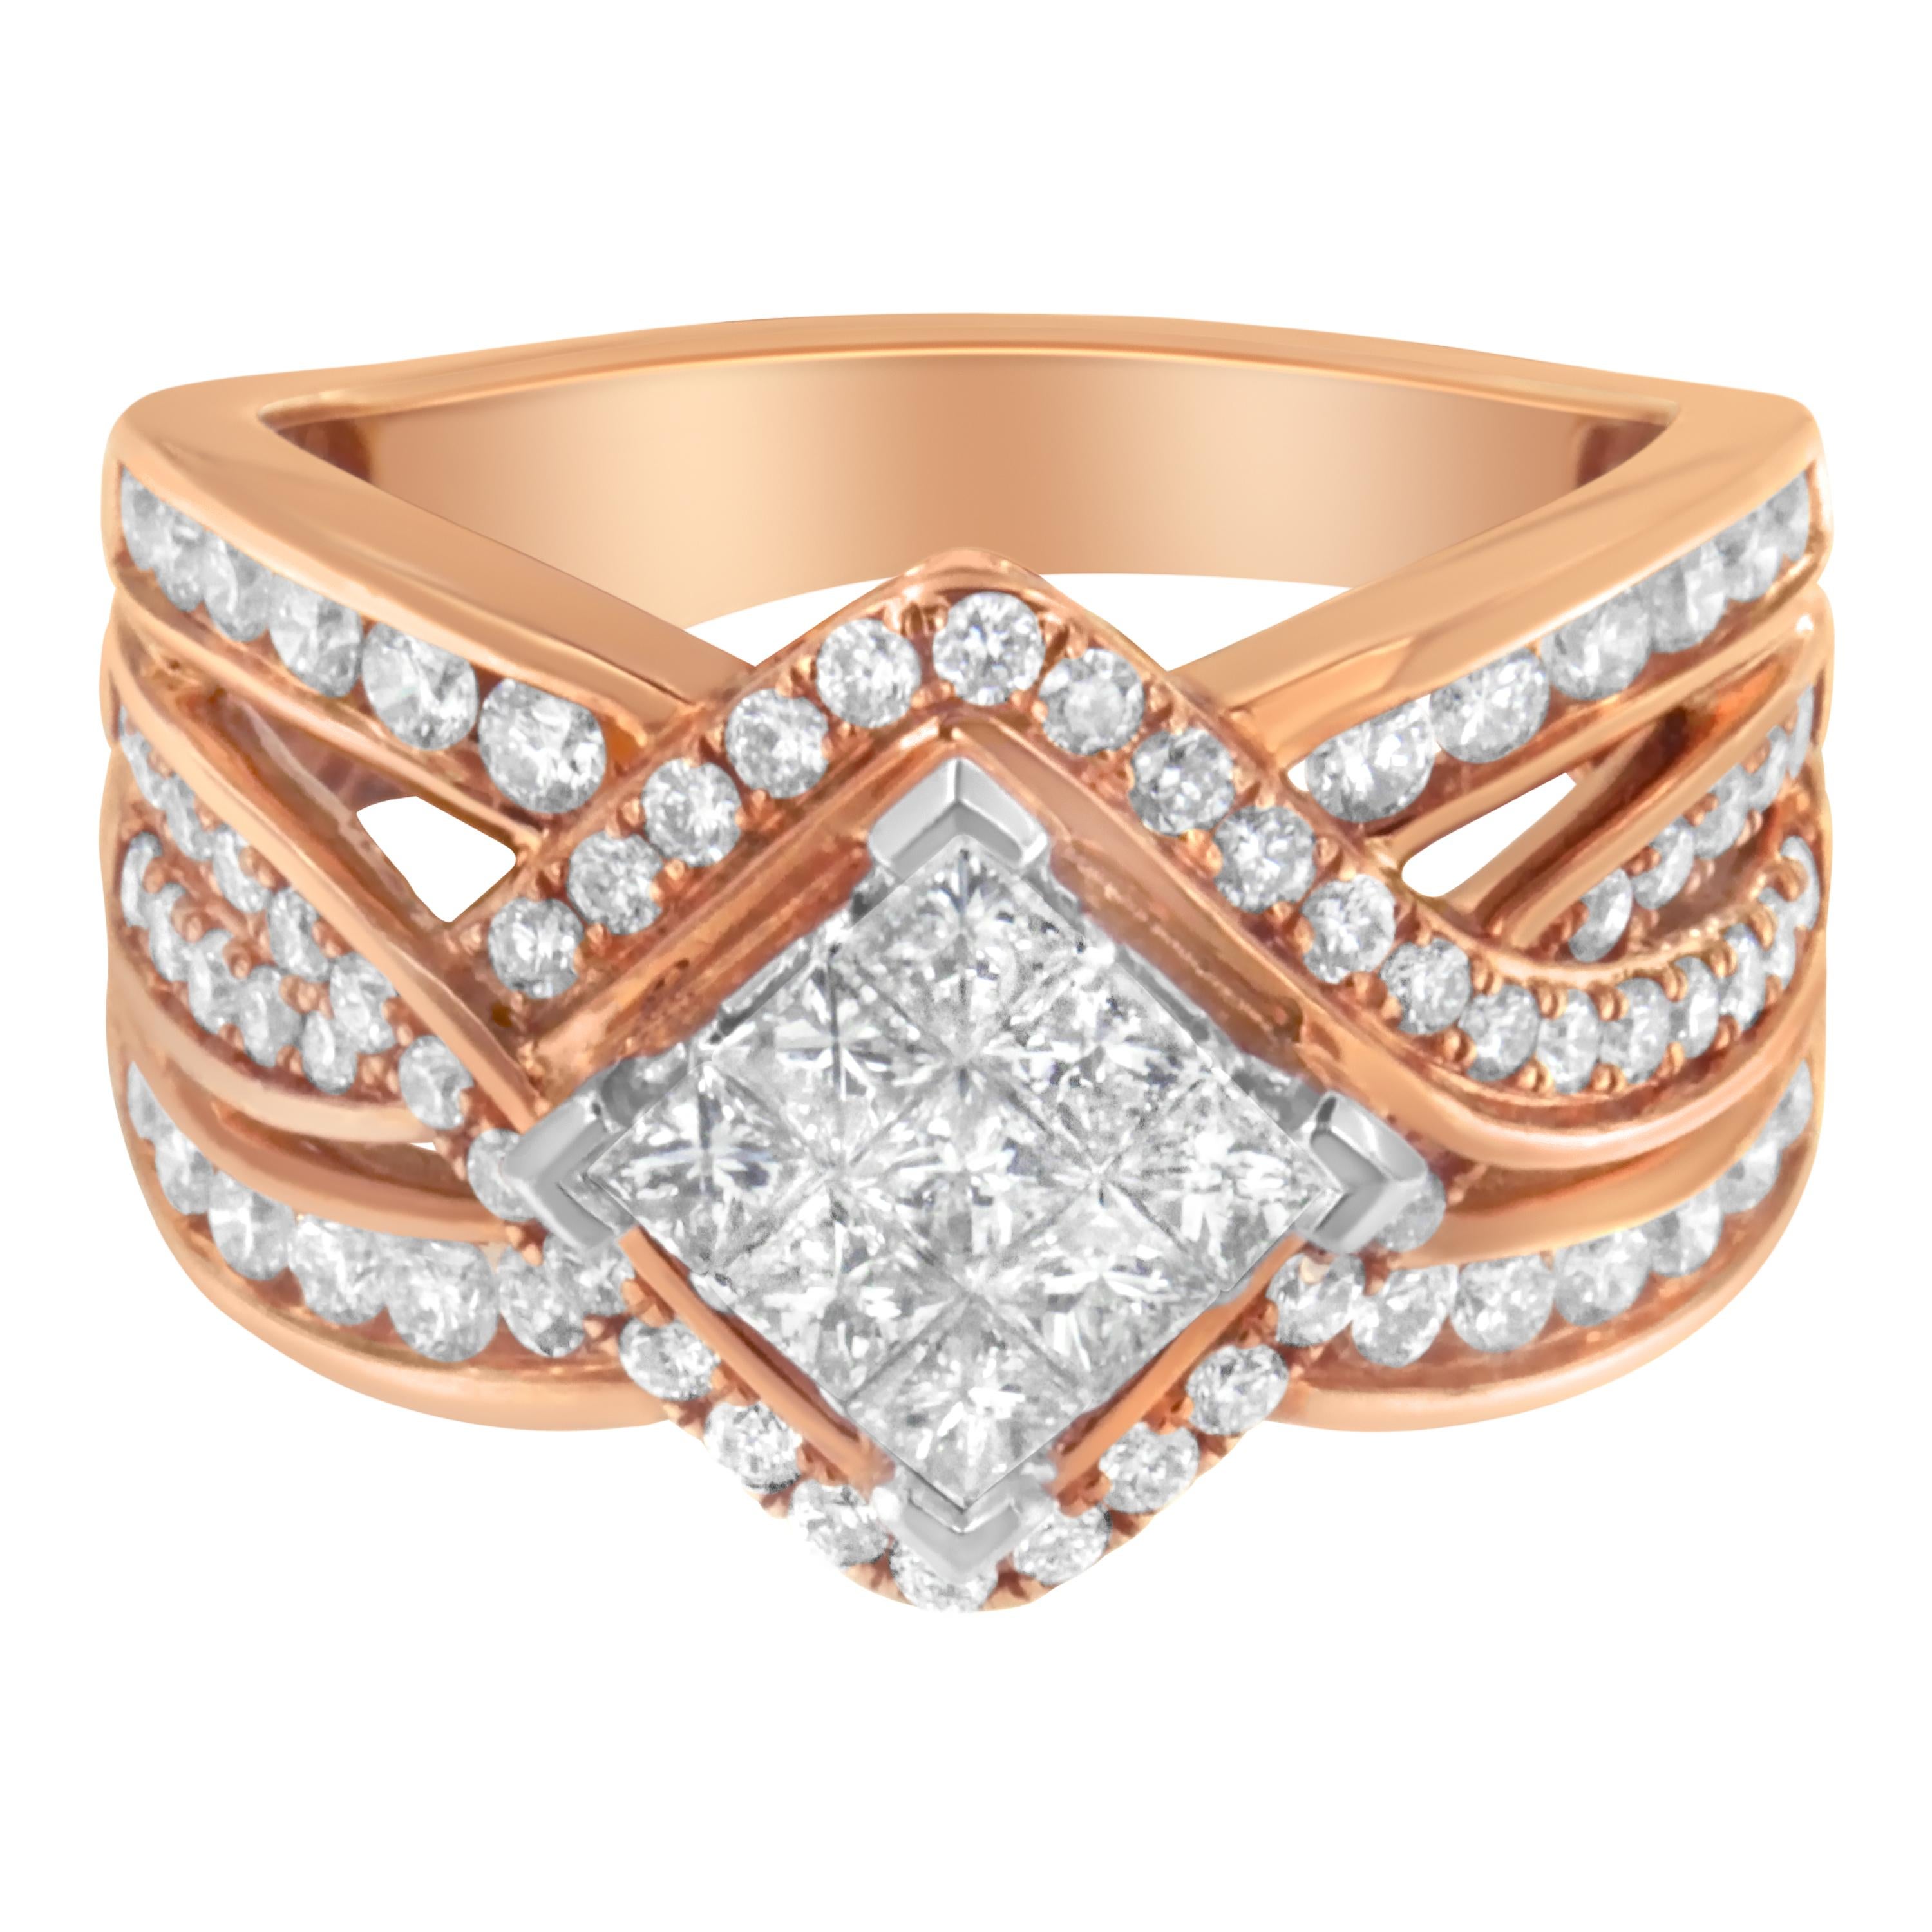 Enjoy this diamond bypass cocktail ring that glistens with a central square cluster of princess cut diamonds. A bypass halo of round diamonds and rows of diamonds along the band add extra sparkle to this unique design. Crafted in two-tone 10 karat